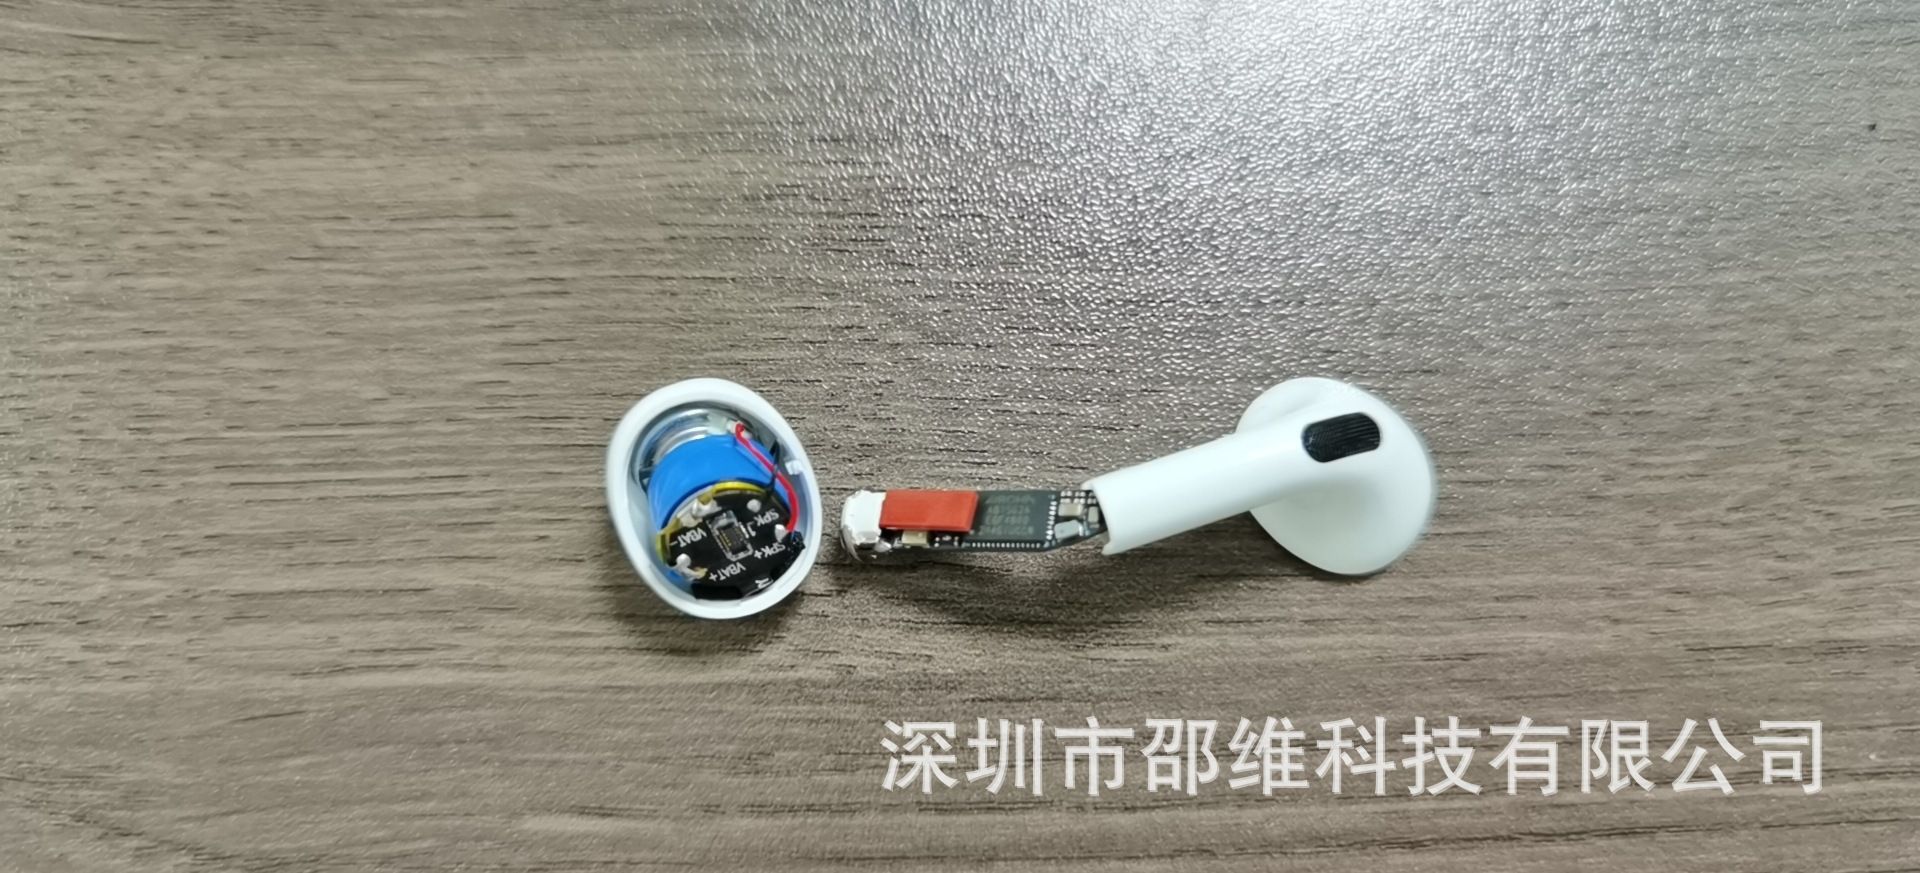 Tai nghe Airpods Pro Hổ Vằn 1562A